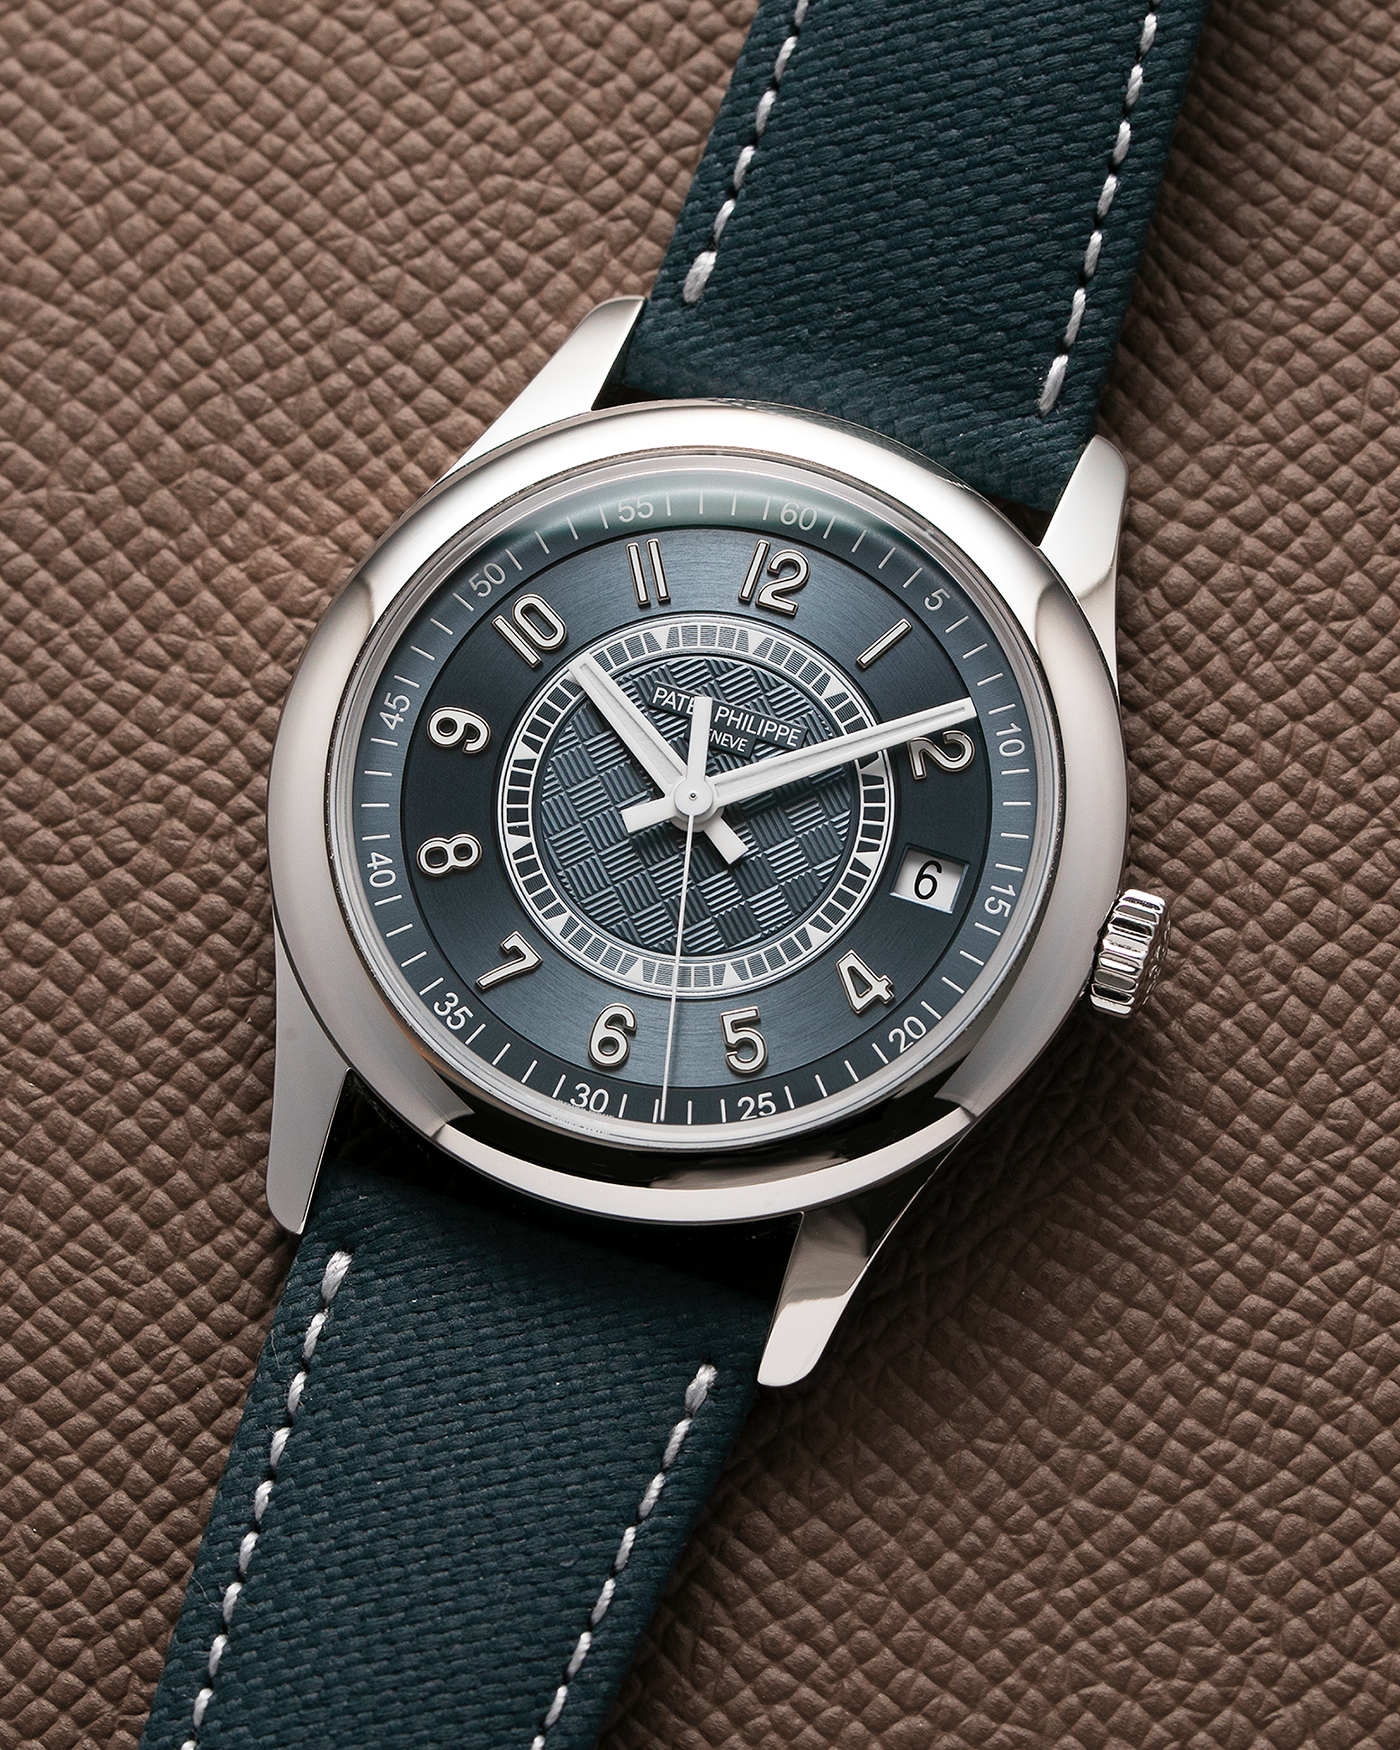 Brand: Patek Philippe Year: 2019 Model: Ref. 6007A Calatrava Limited Edition Material: Stainless Steel Movement: Cal. 324 SC (Seconde Central), Self–Winding Case Diameter: 40mm Bracelet/Strap: Patek Philippe Grey-Blue Calfskin Leather Strap with Embossed Fabric Pattern, and Signed Tang Buckle